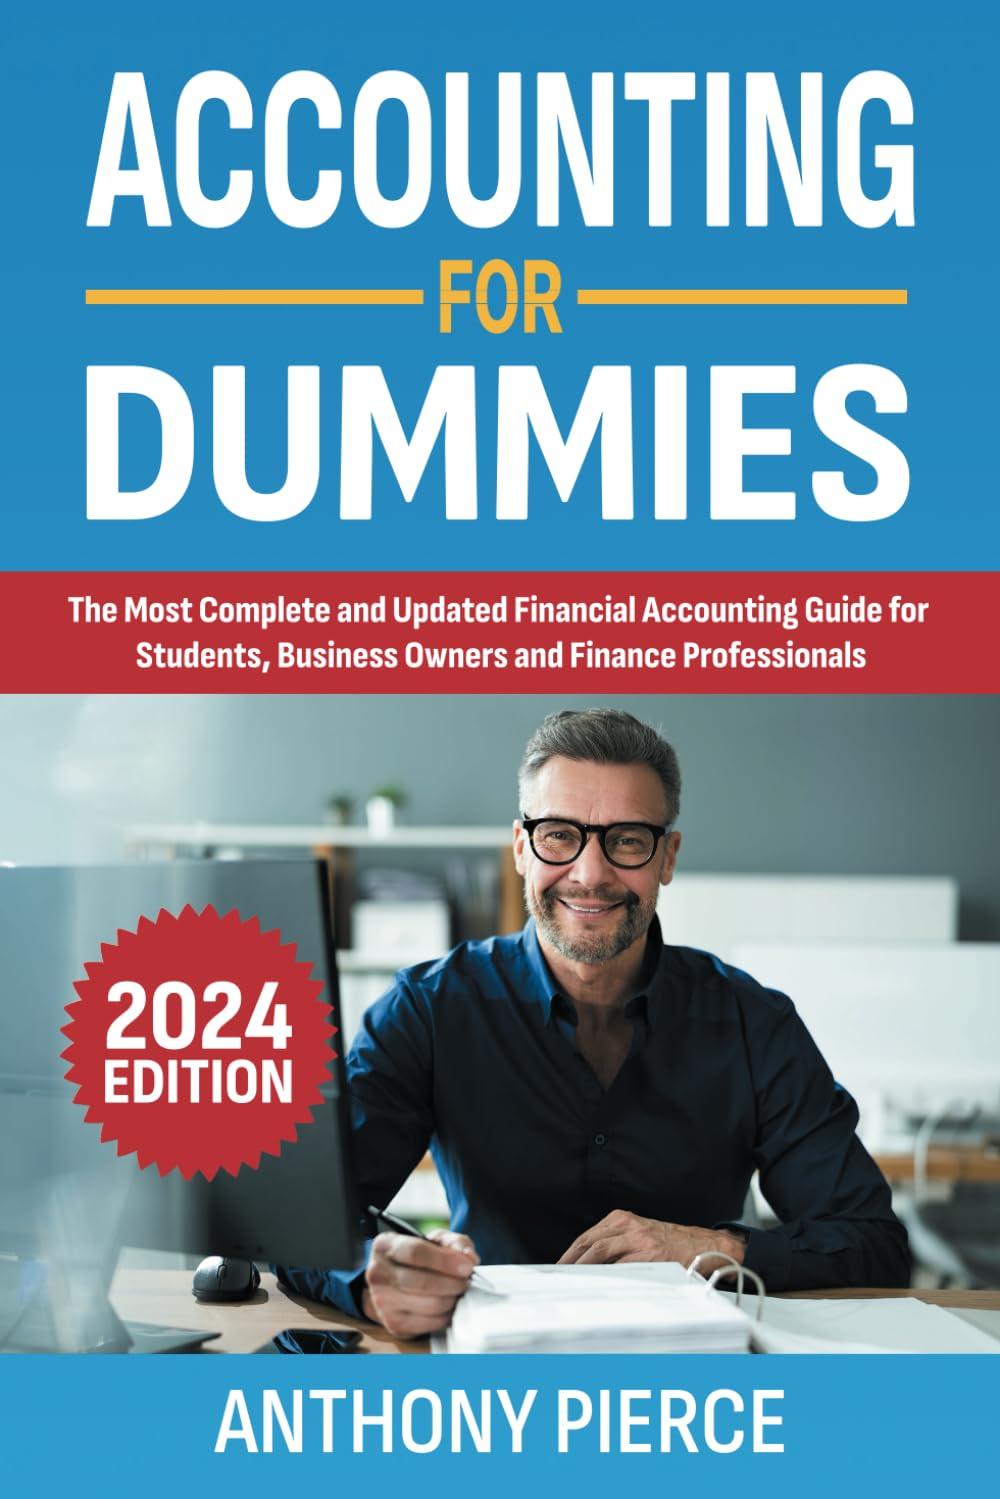 accounting for dummies 2024 the most complete and updated financial accounting guide for students business